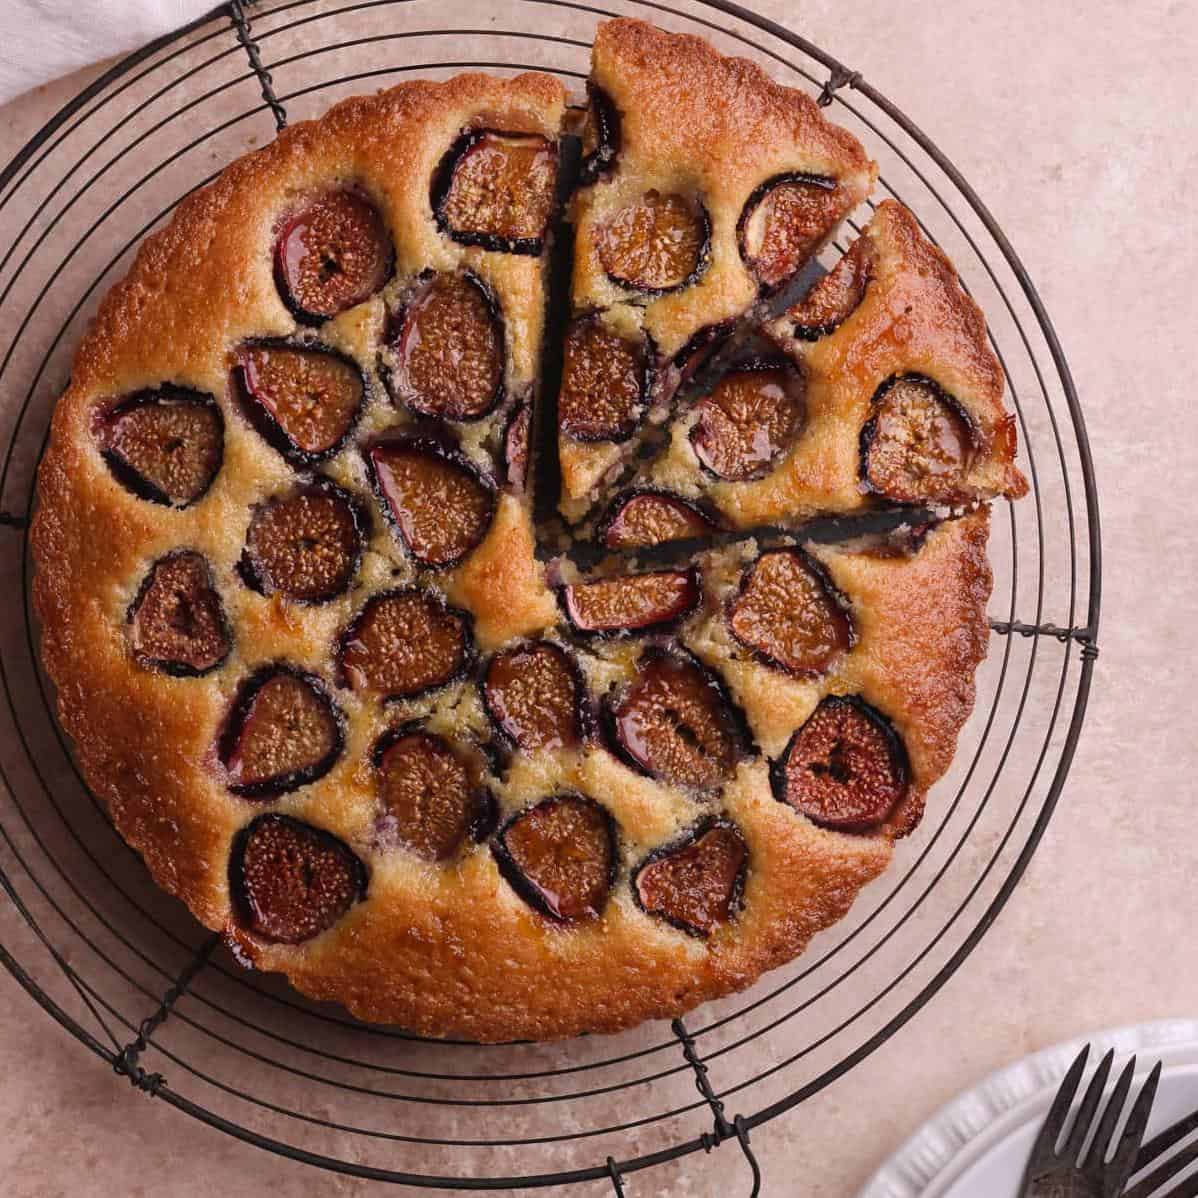  Perfect harmony between figs and almonds.